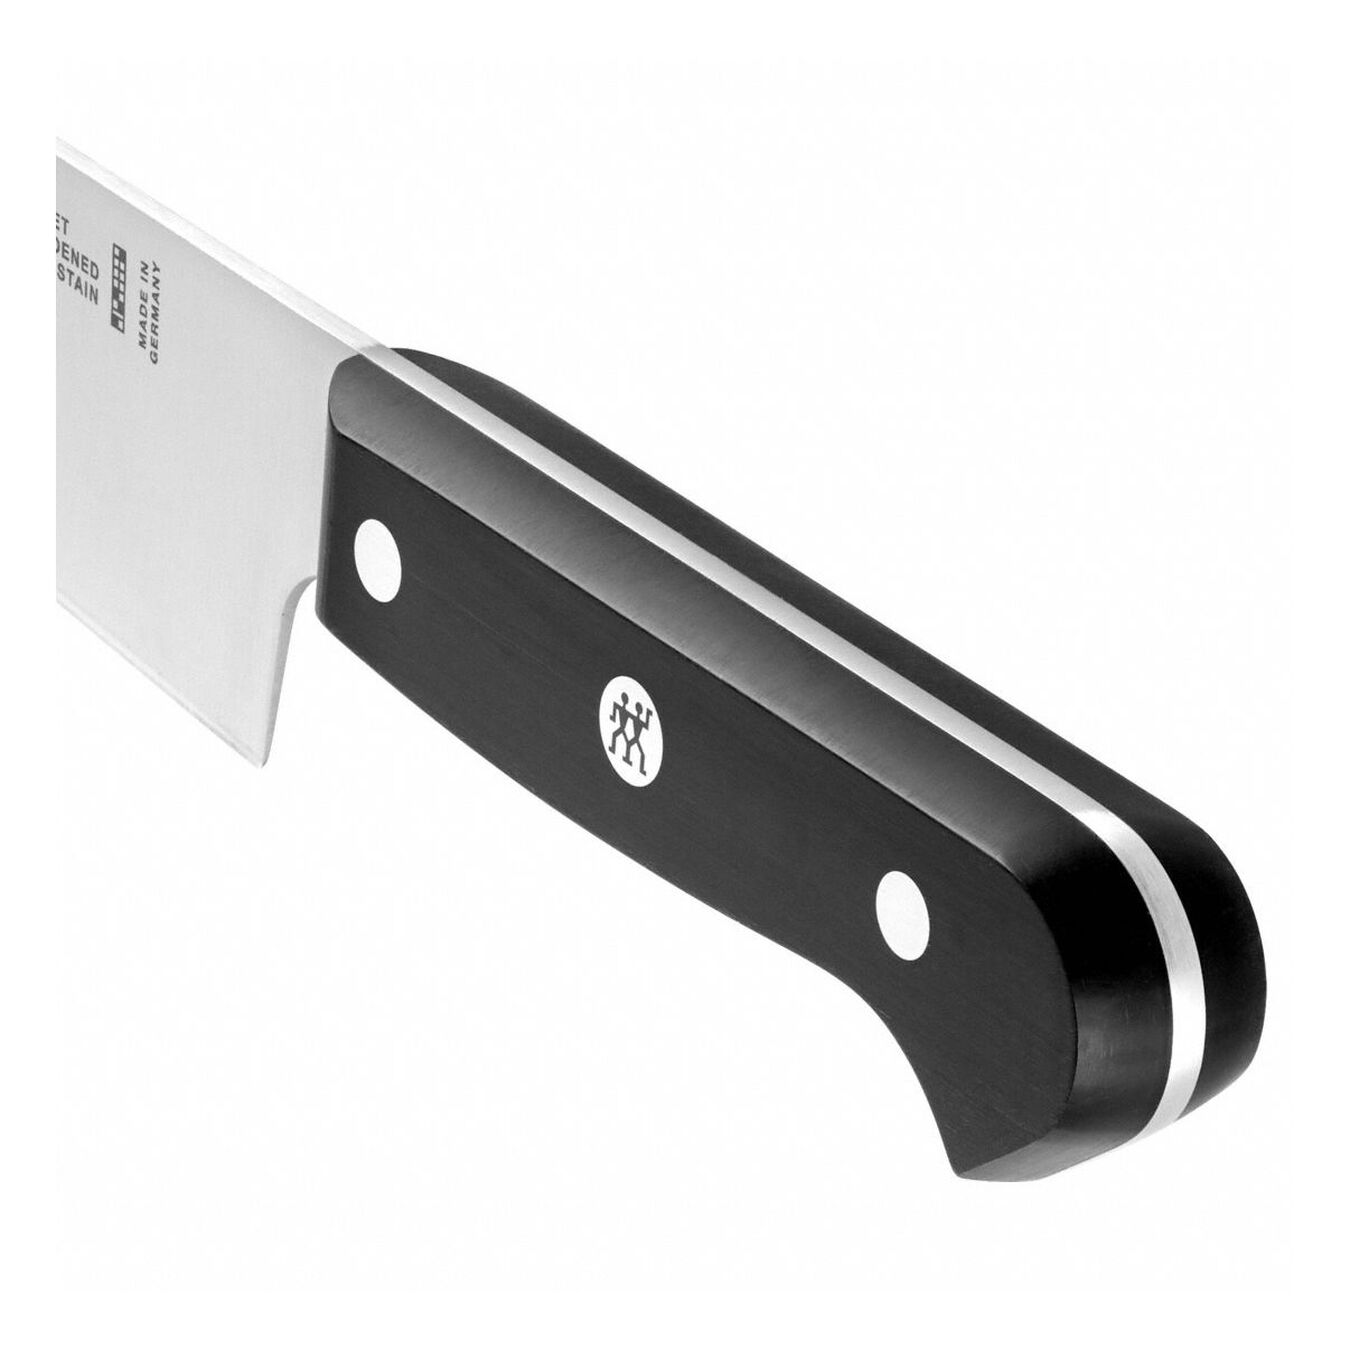 2.5-inch, Peeling knife - Visual Imperfections,,large 2